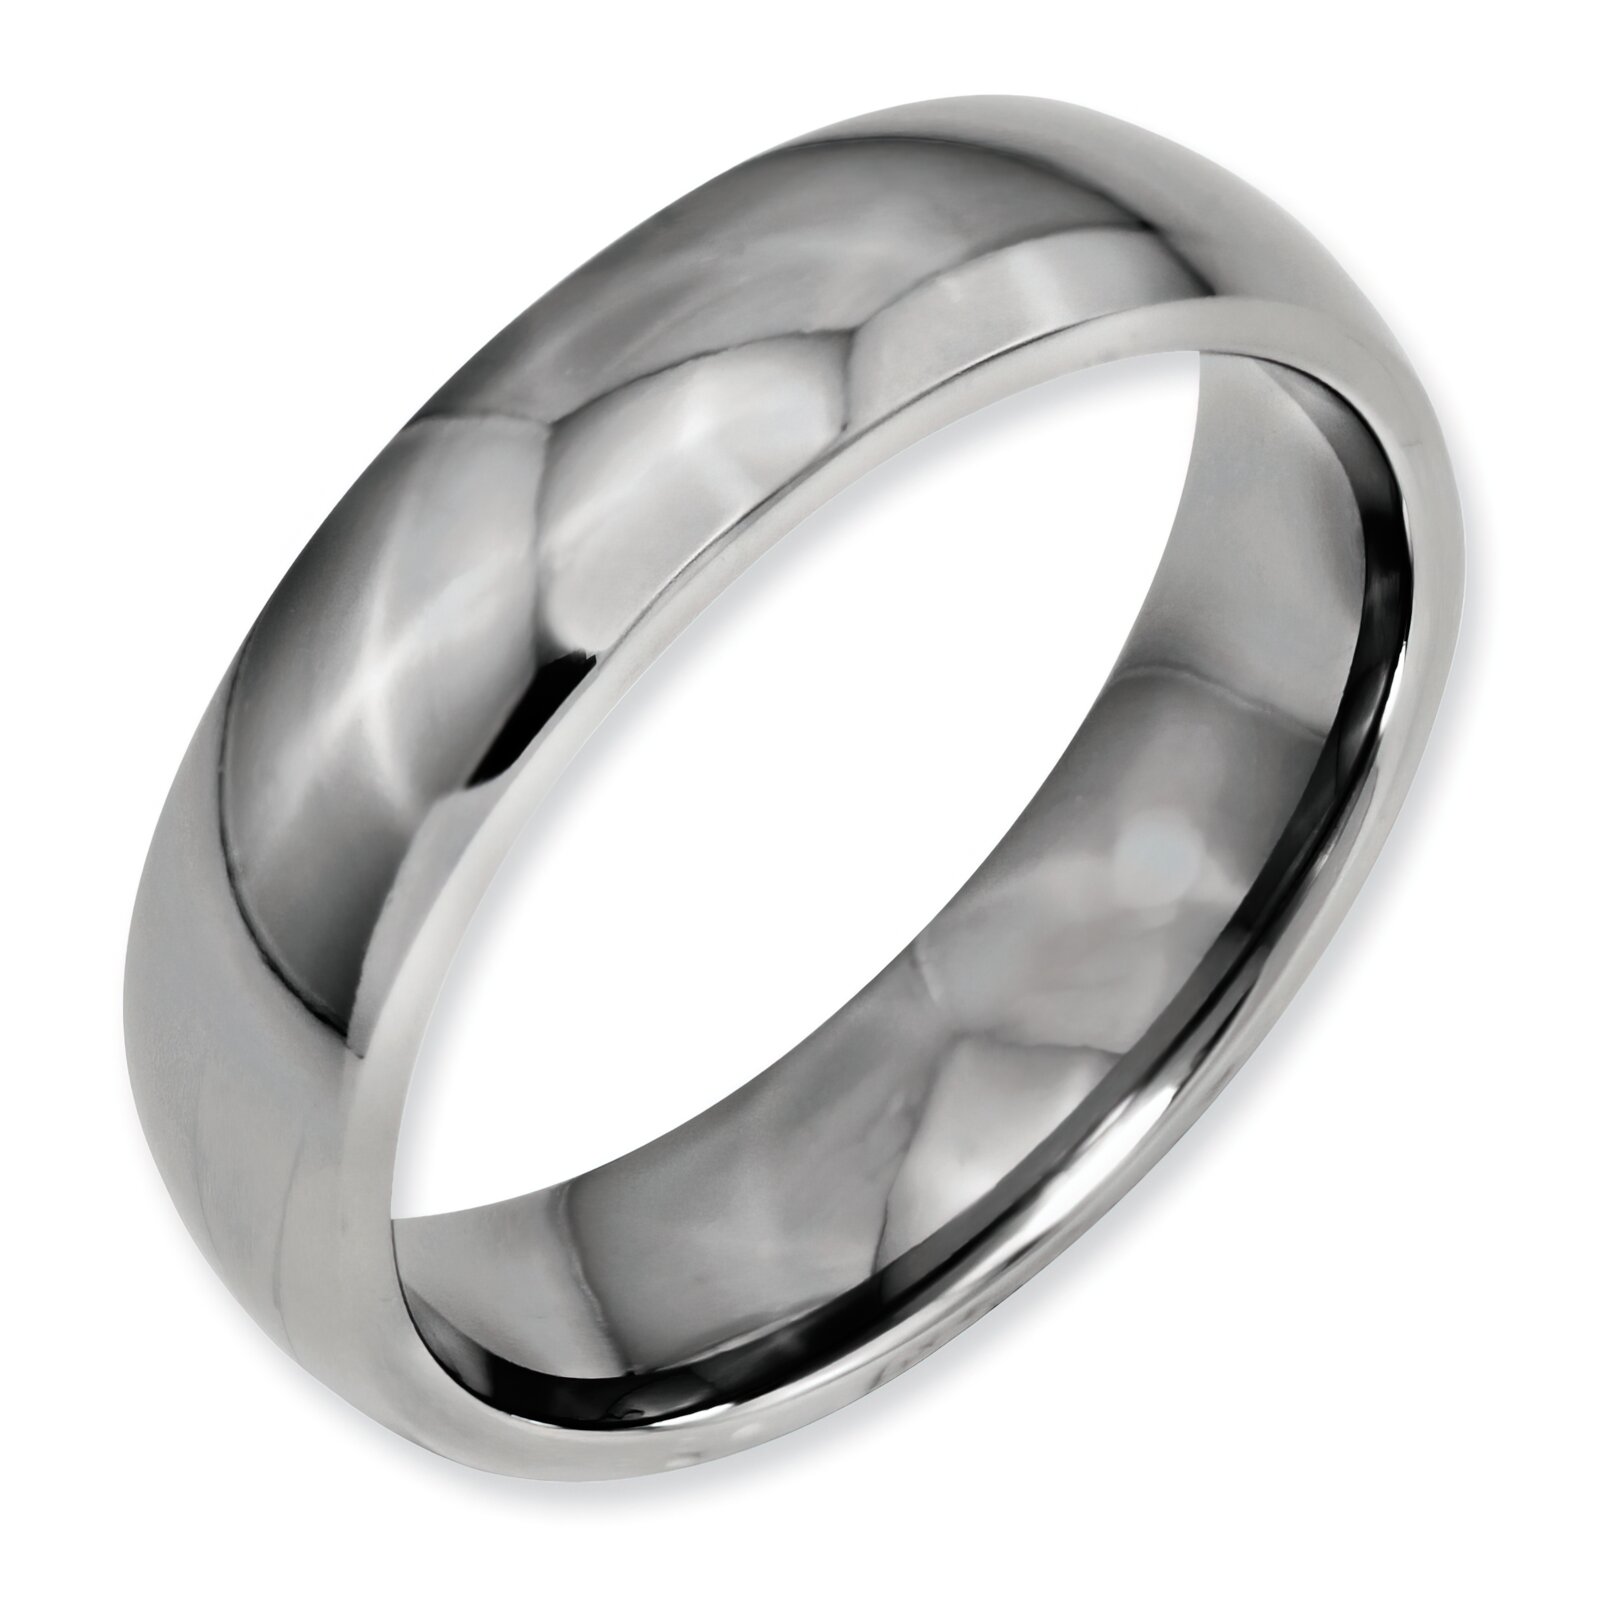 Findingking Titanium 6mm Mens Wedding Ring Band Jewelry Size 8